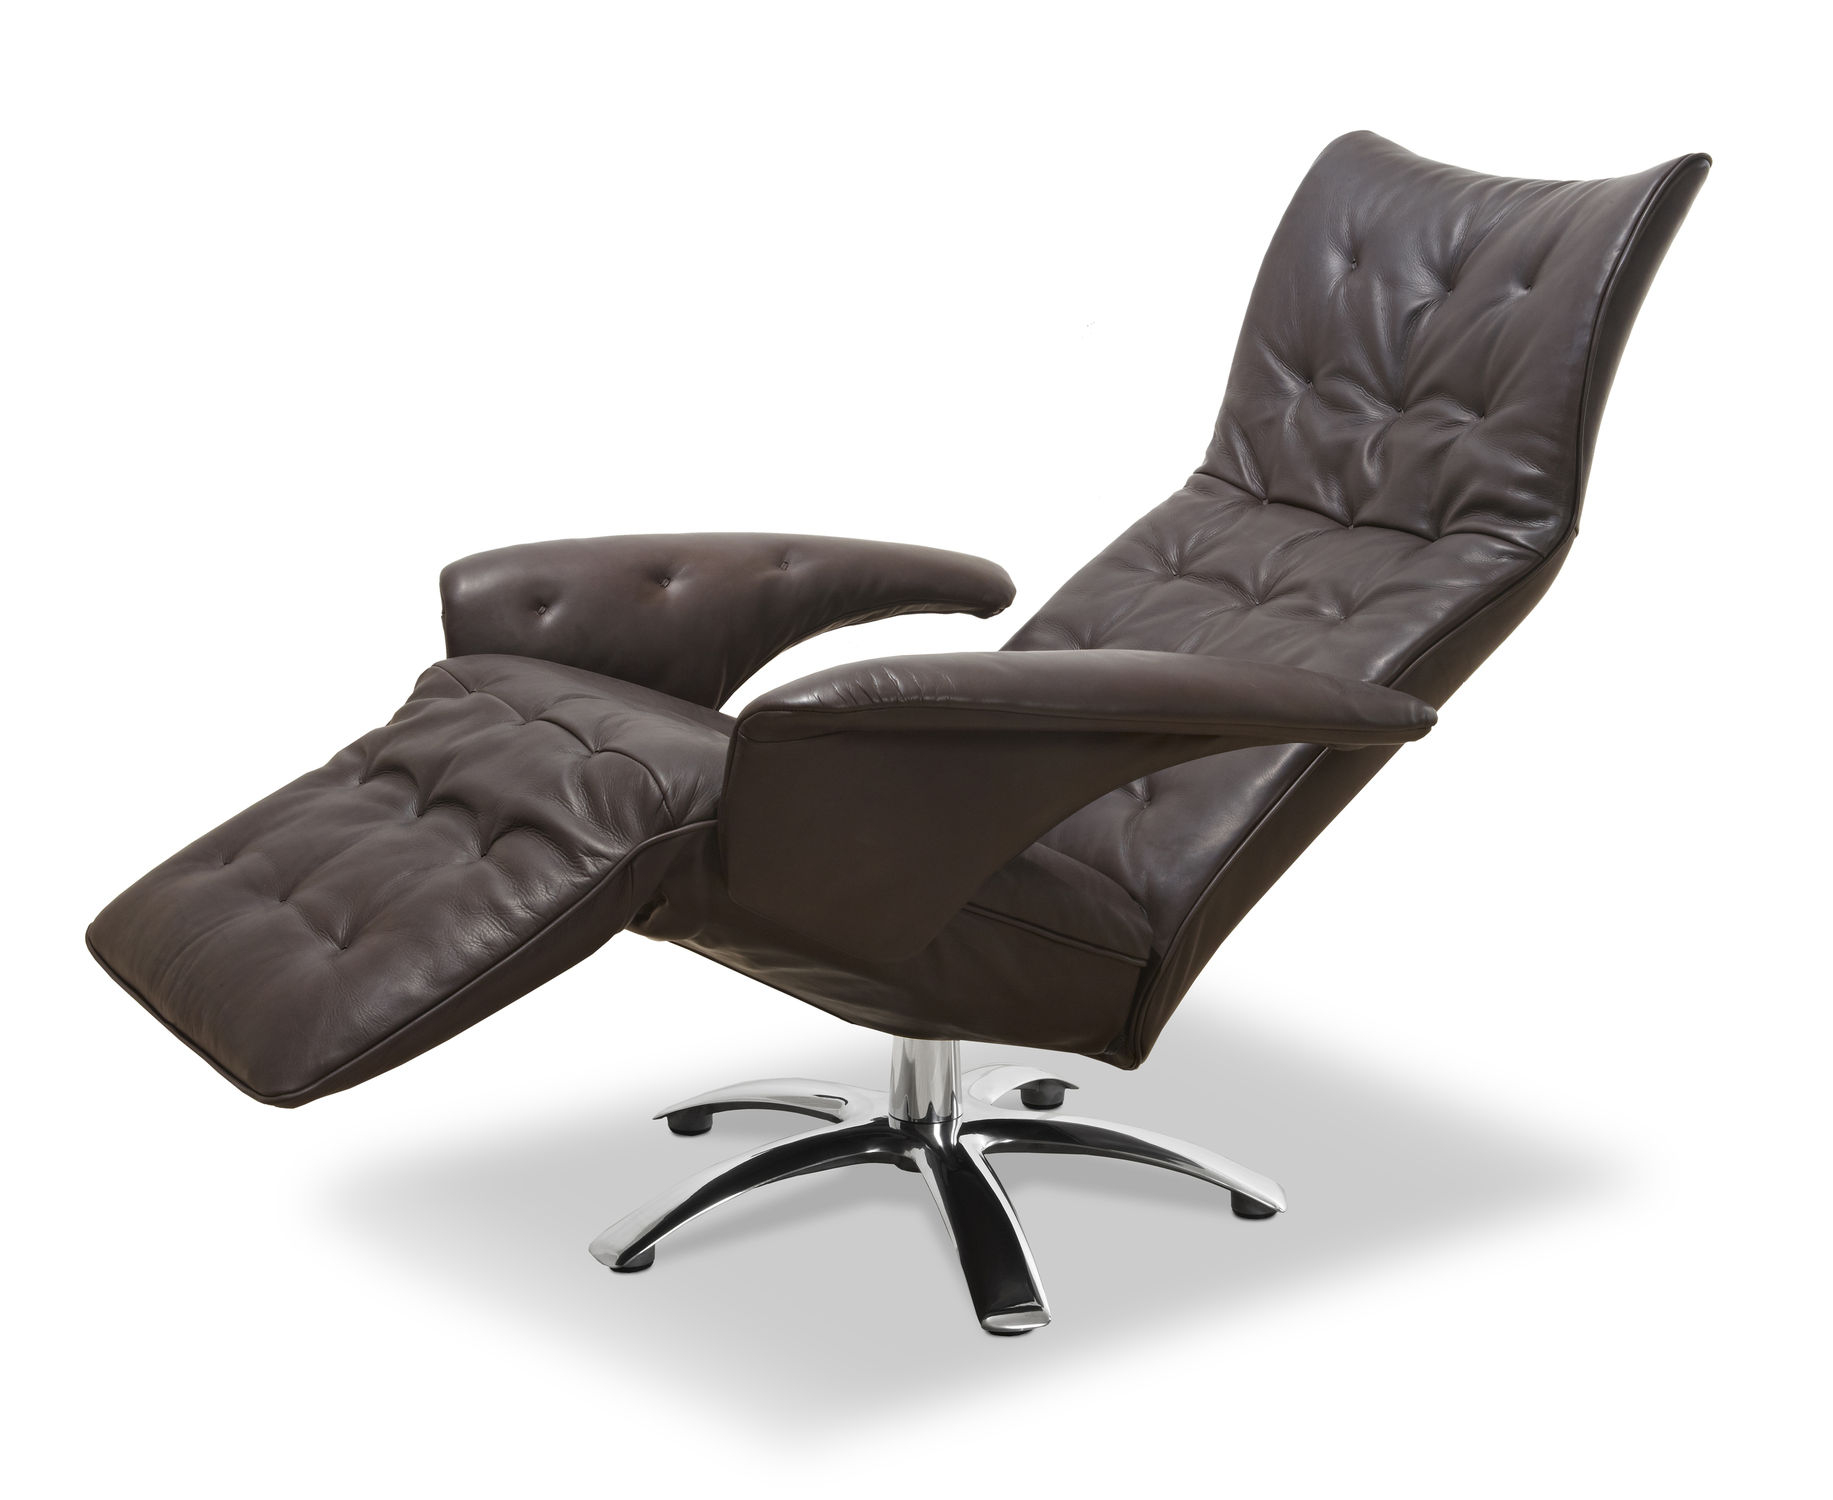 Recliners For Small Spaces Visualhunt, Leather Recliners For Small Spaces